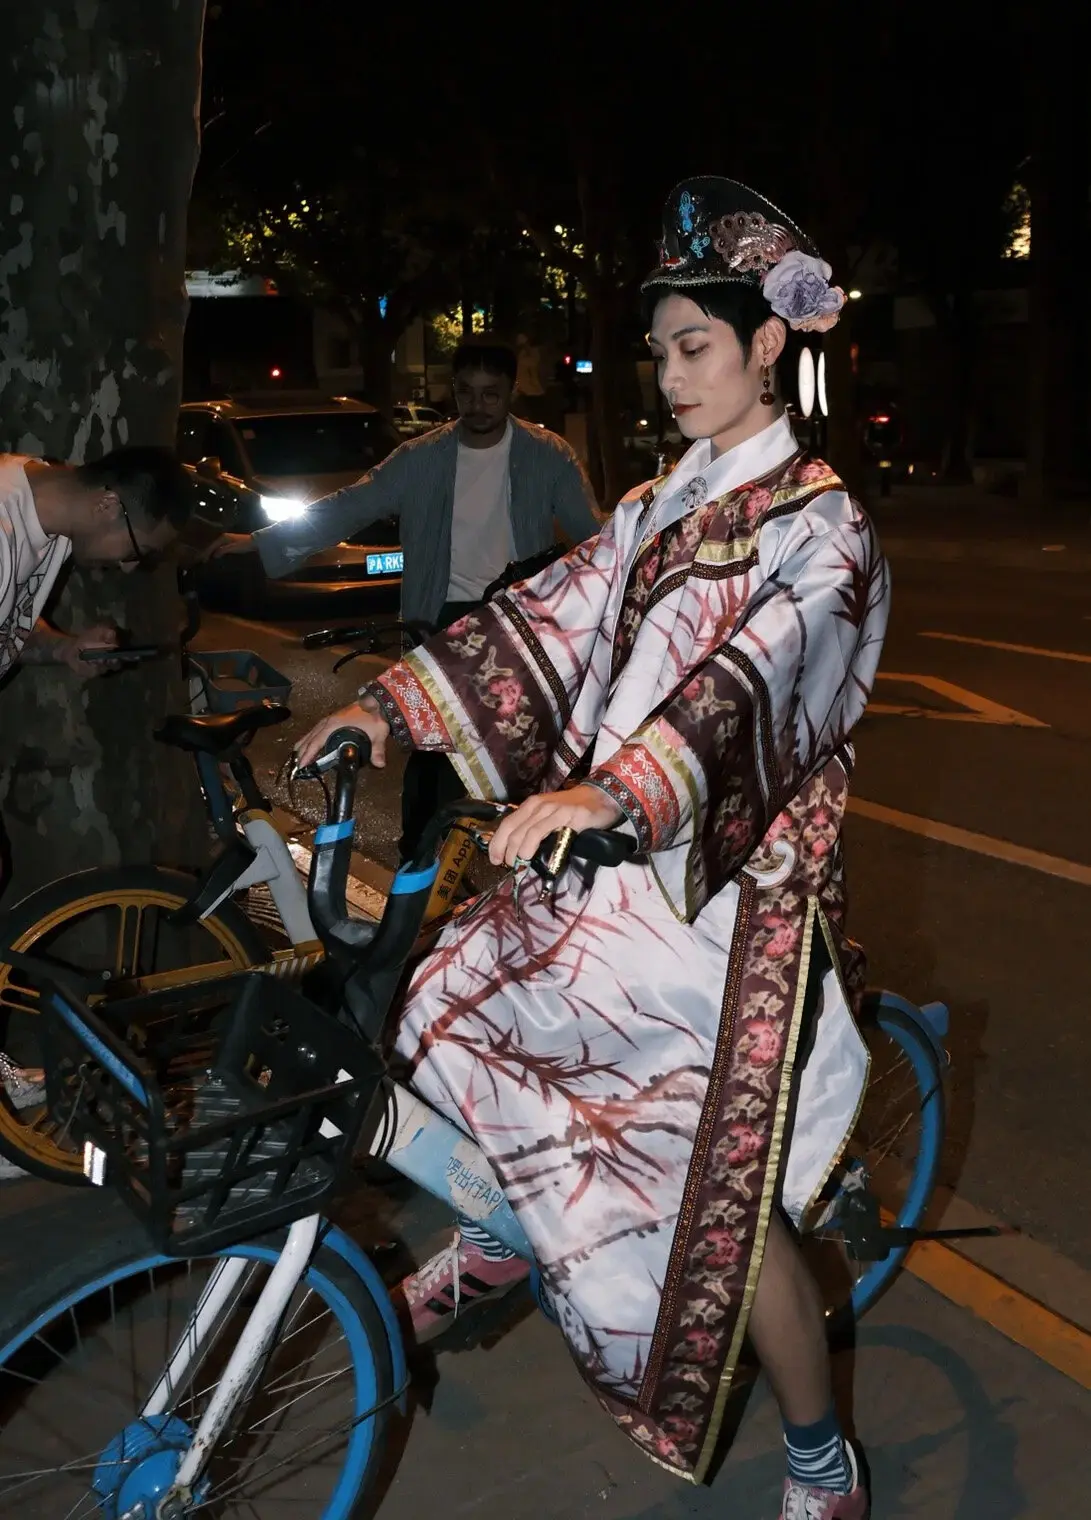 A man dressed up as an ancient Chinese royal concubine riding a bike.